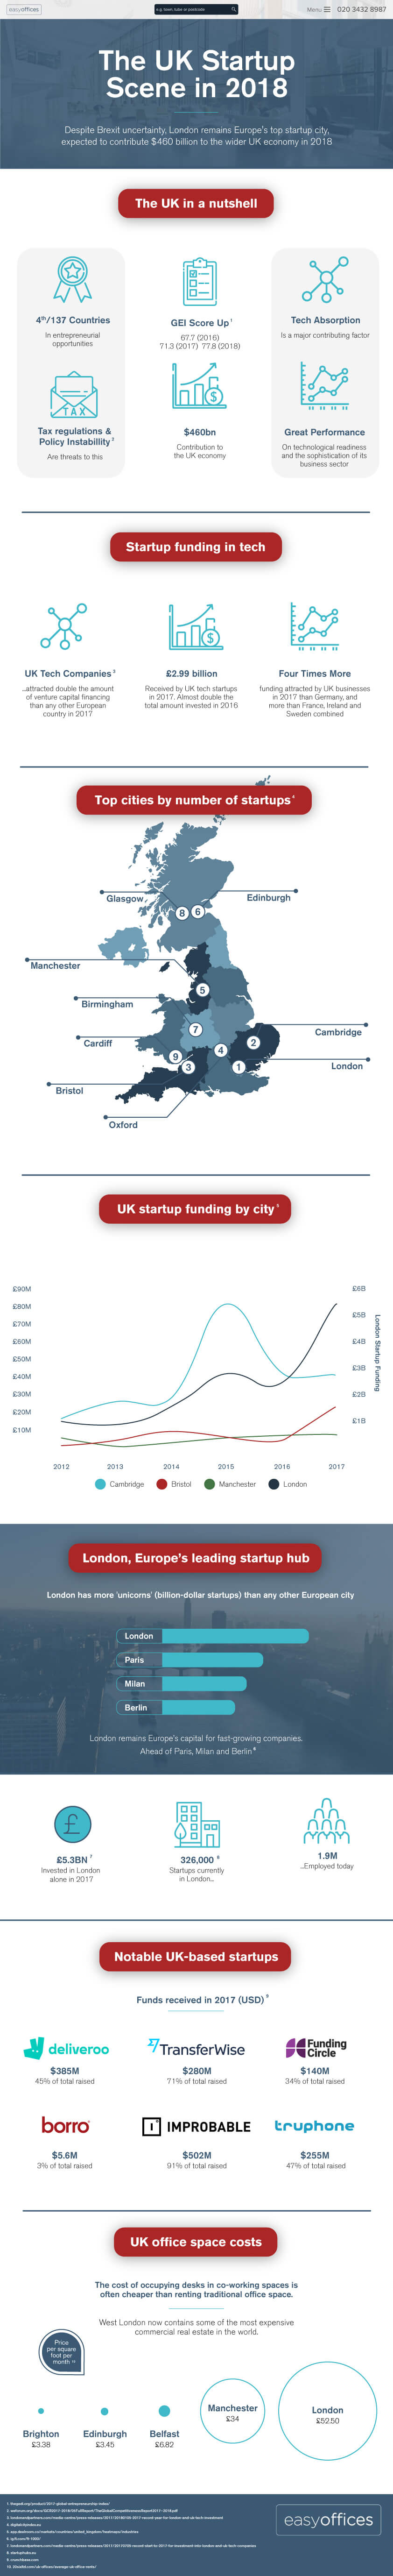 Easy Offices UK Startup Investigation Infographic